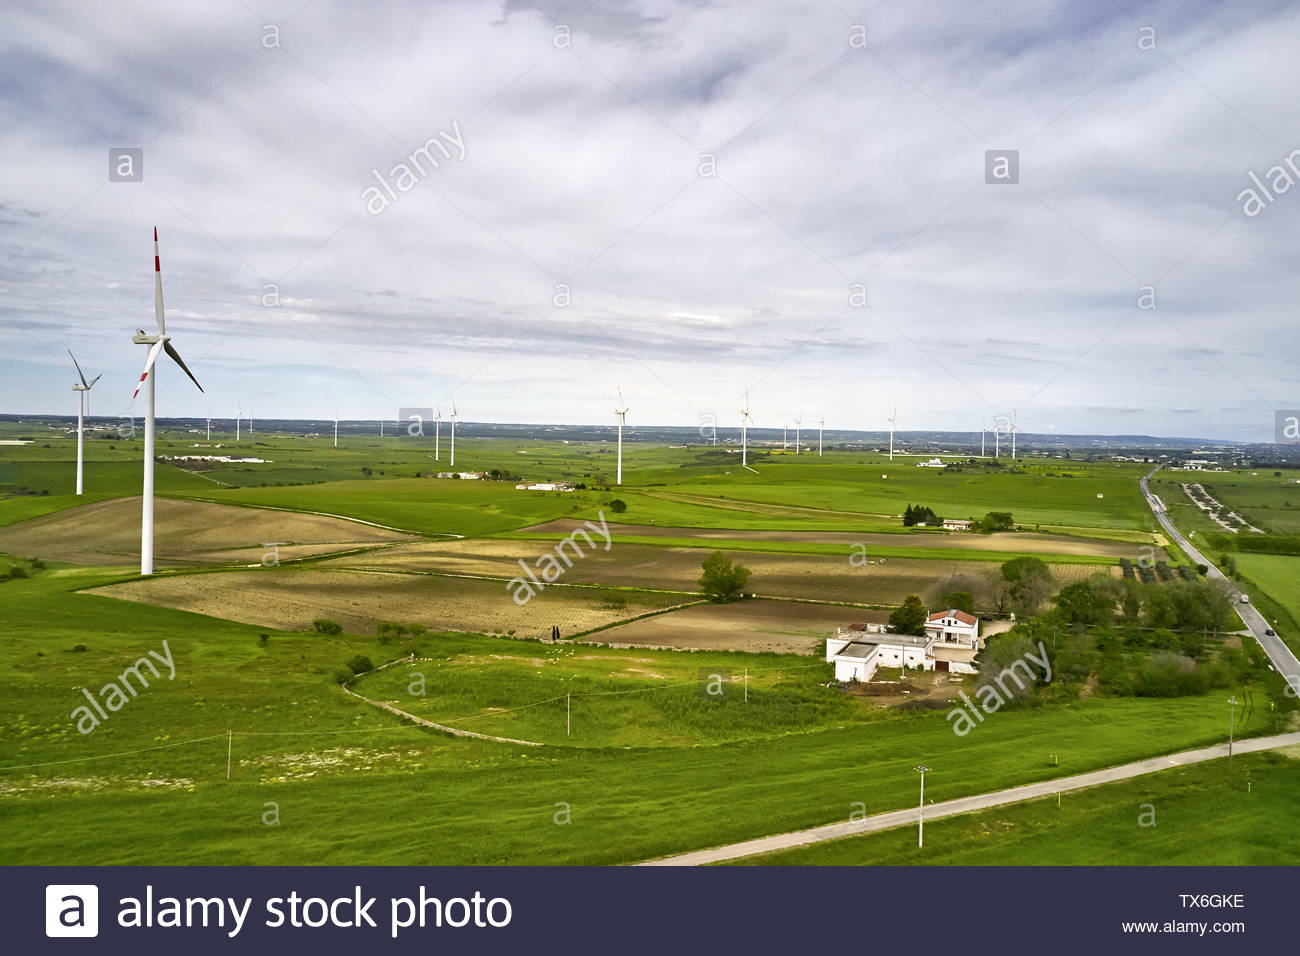 Nice Green Landscape With Many Wind Generators On The Fields